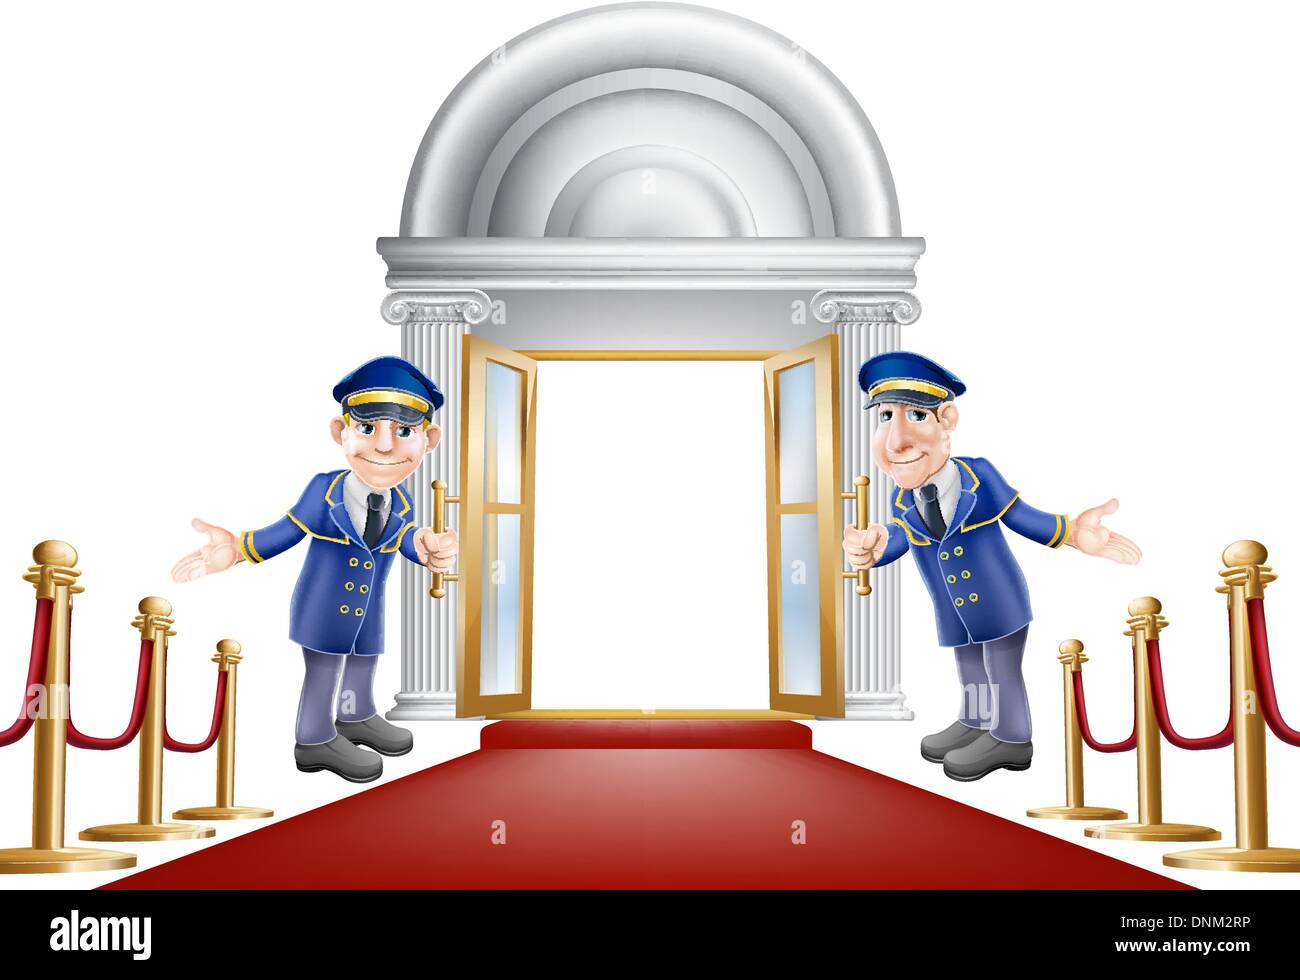 An illustration of a red carpet entrance with velvet ropes and two doormen welcoming the viewer in Stock Vector